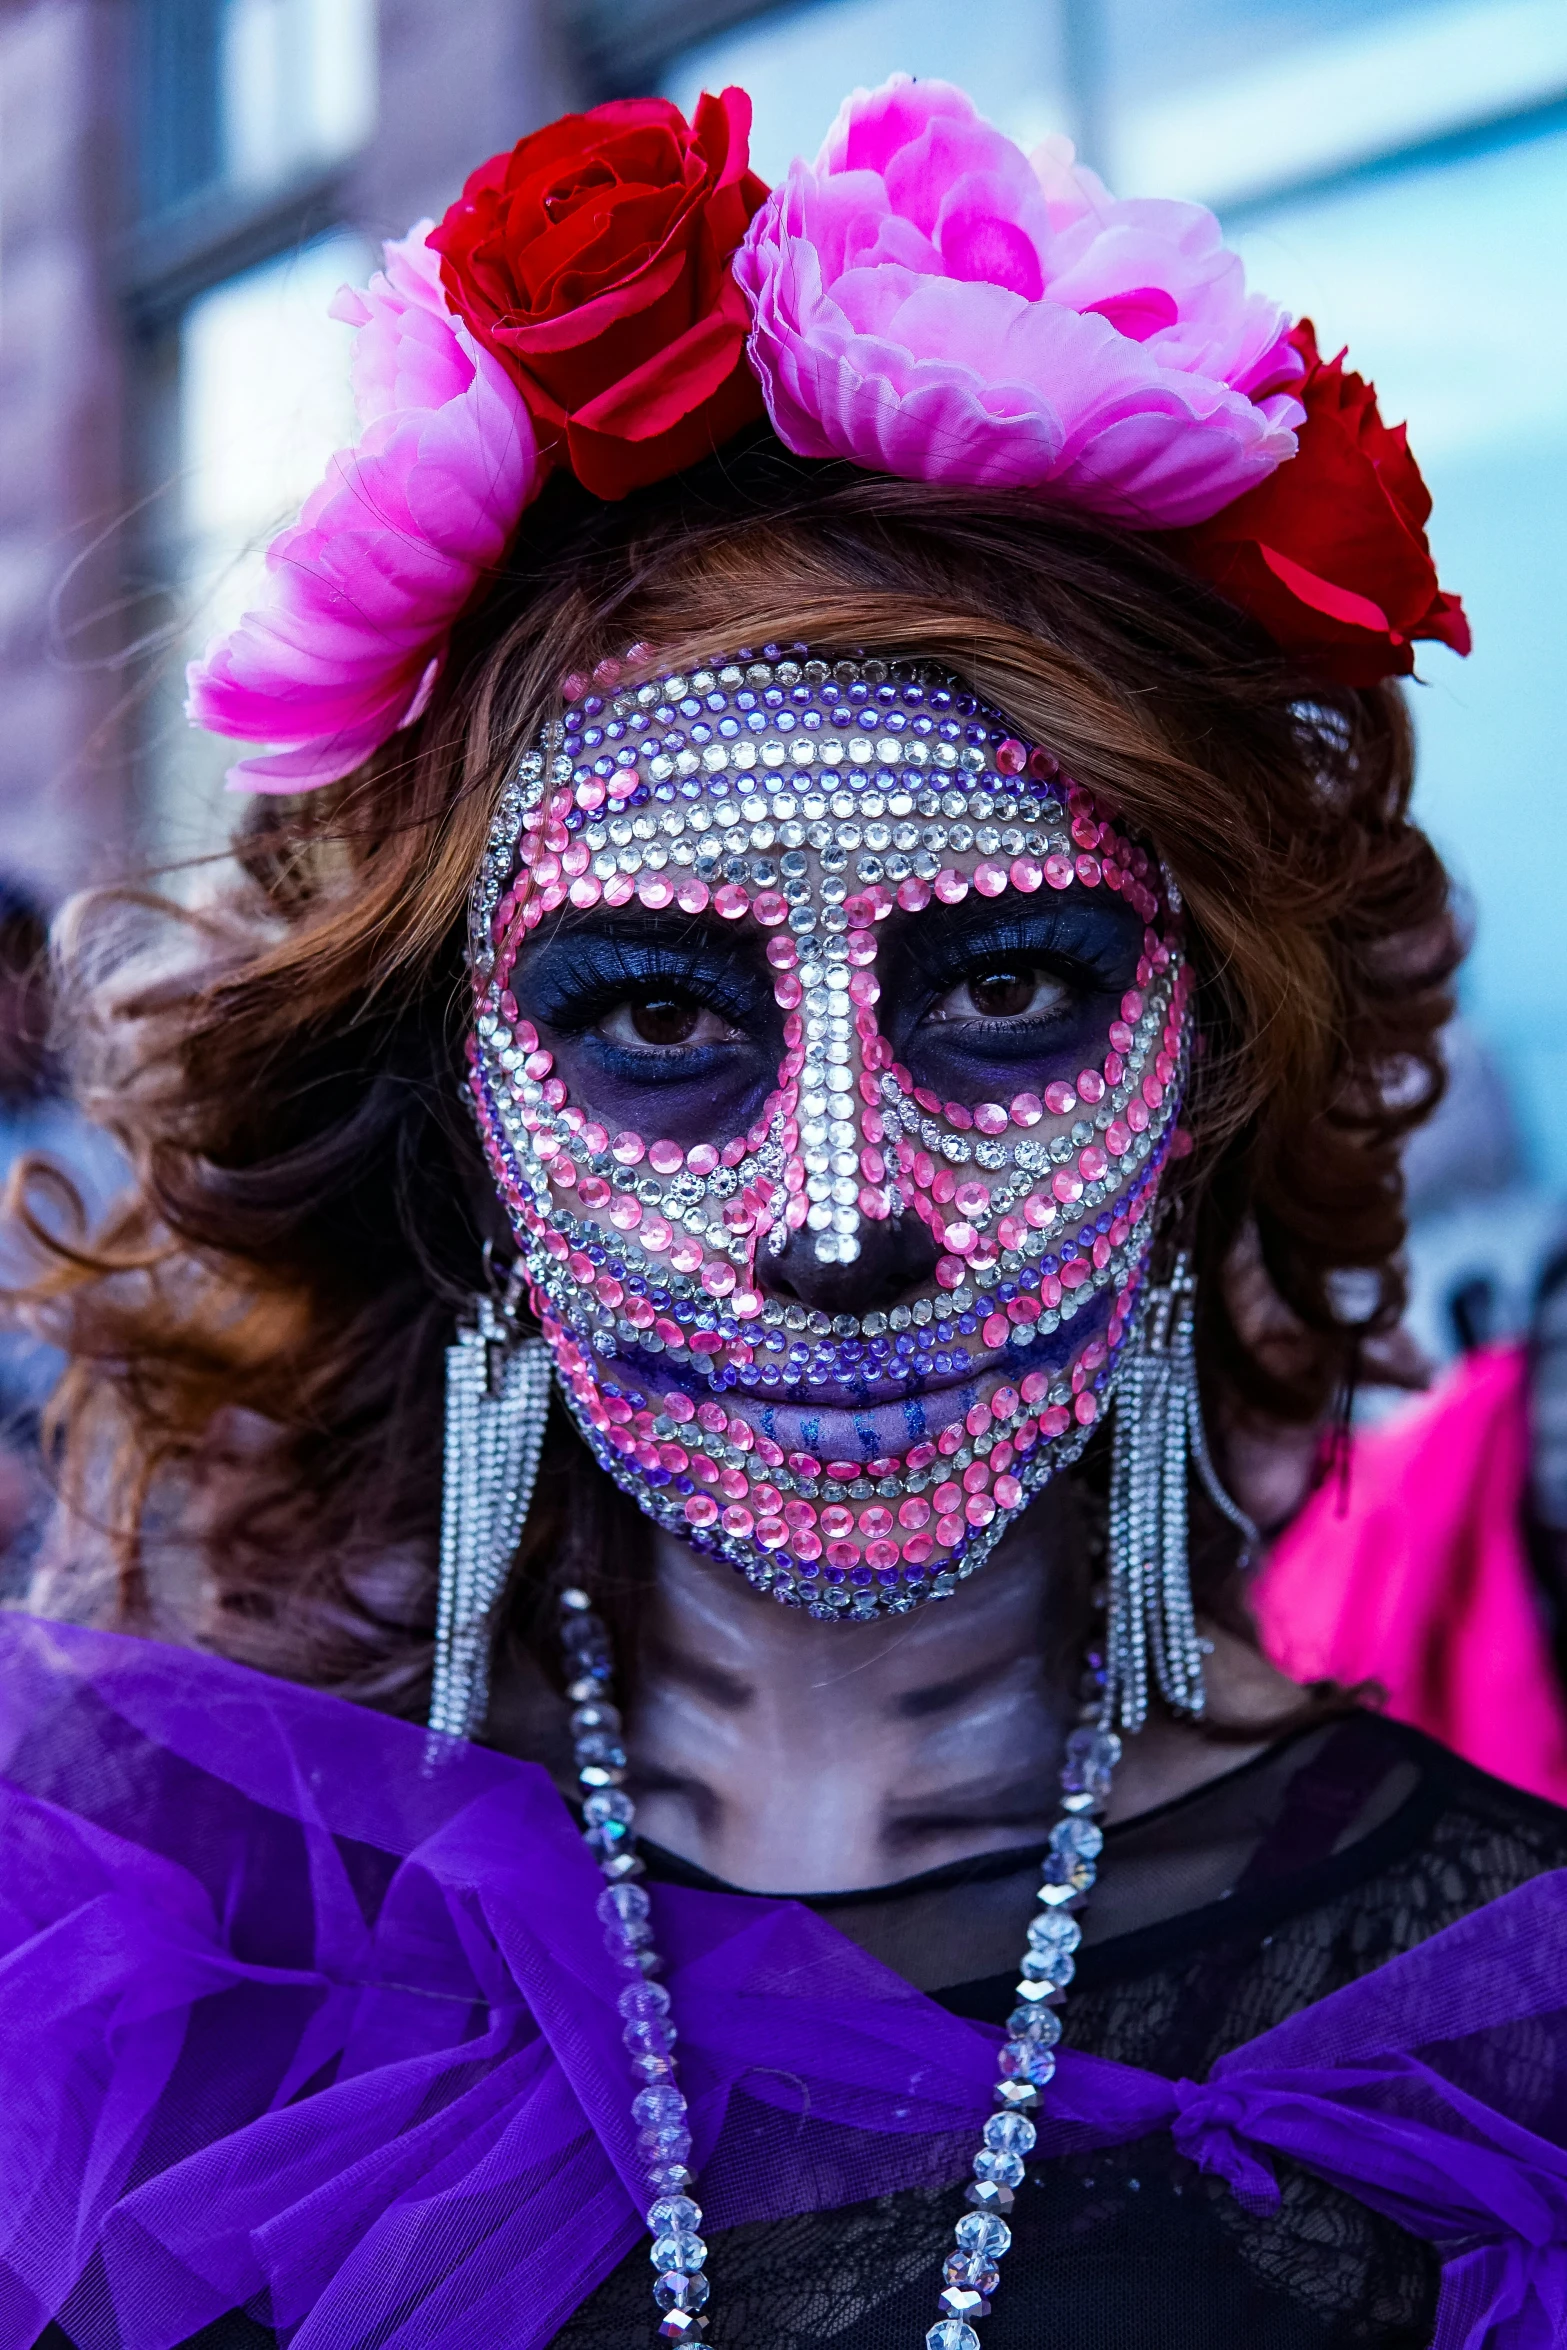 a close up of a woman with makeup and decorations on her face